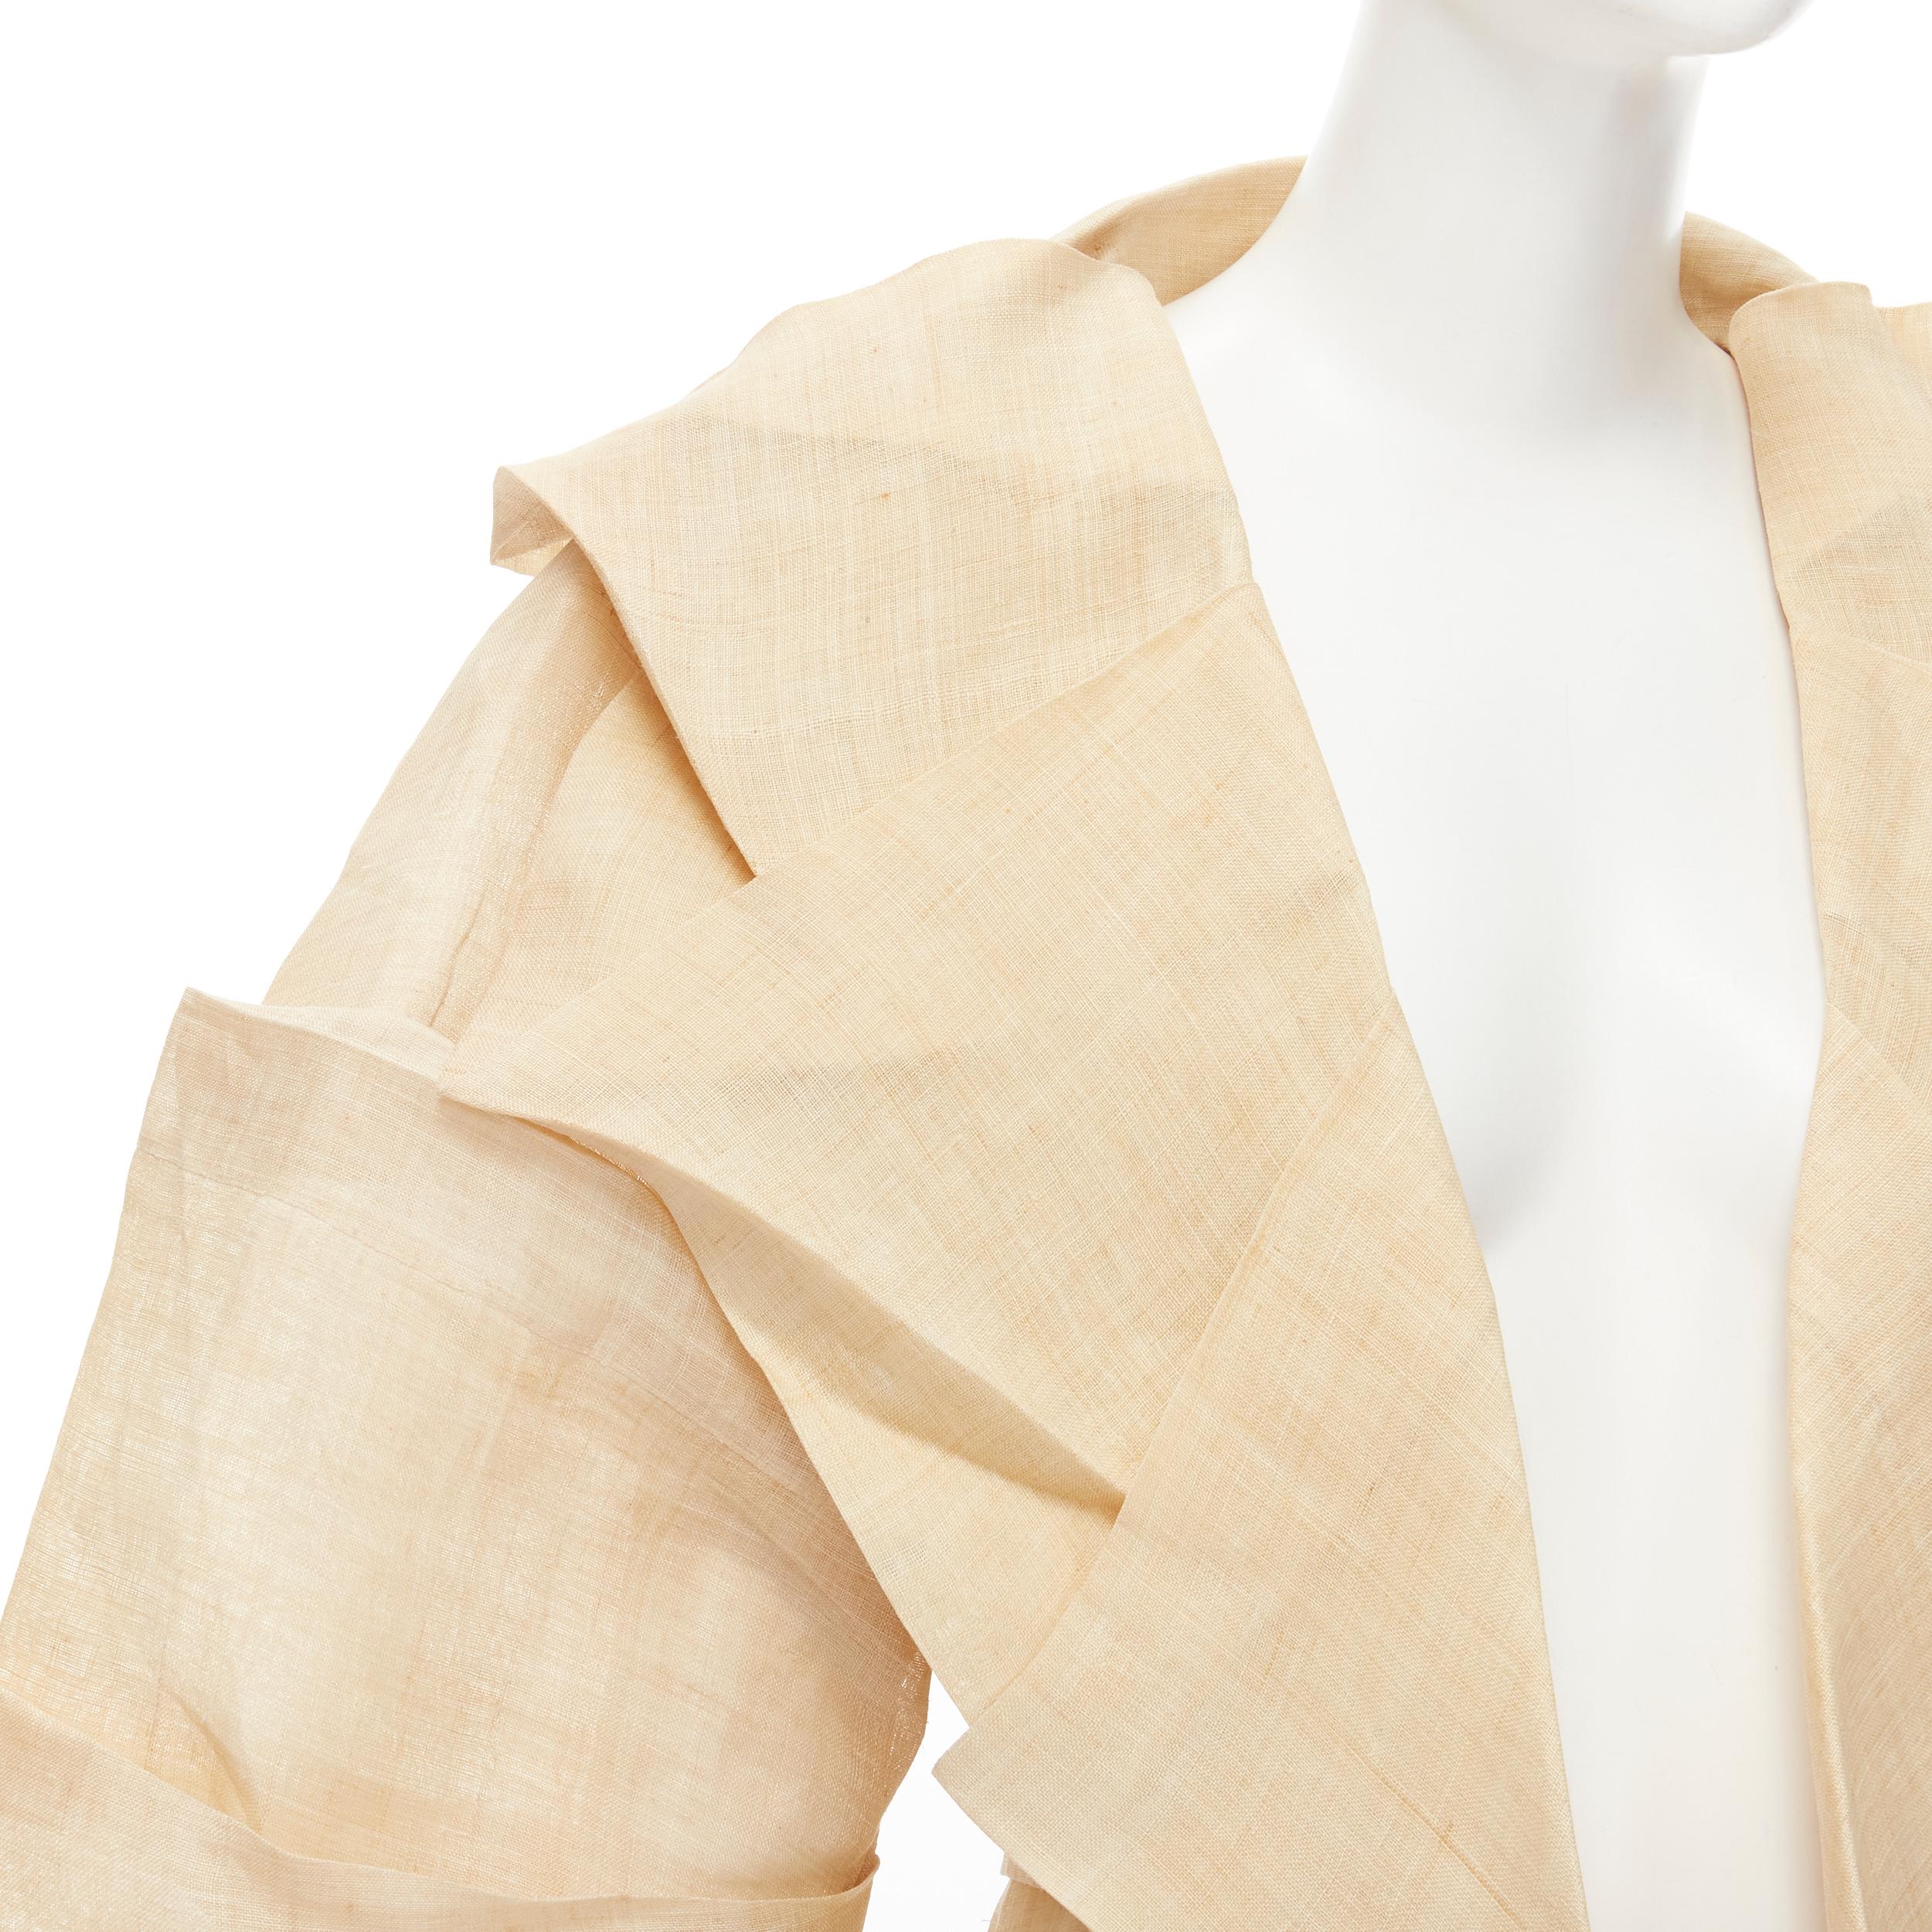 ISSEY MIYAKE Vintage 1991 Runway Dinosaur architectural pleated linen jacket XL 
Reference: CRTI/A00121 
Brand: Issey Miyake 
Collection: Spring Summer 1991 Runway 
Material: Linen 
Color: Beige 
Pattern: Solid 
Extra Detail: Highly collectible